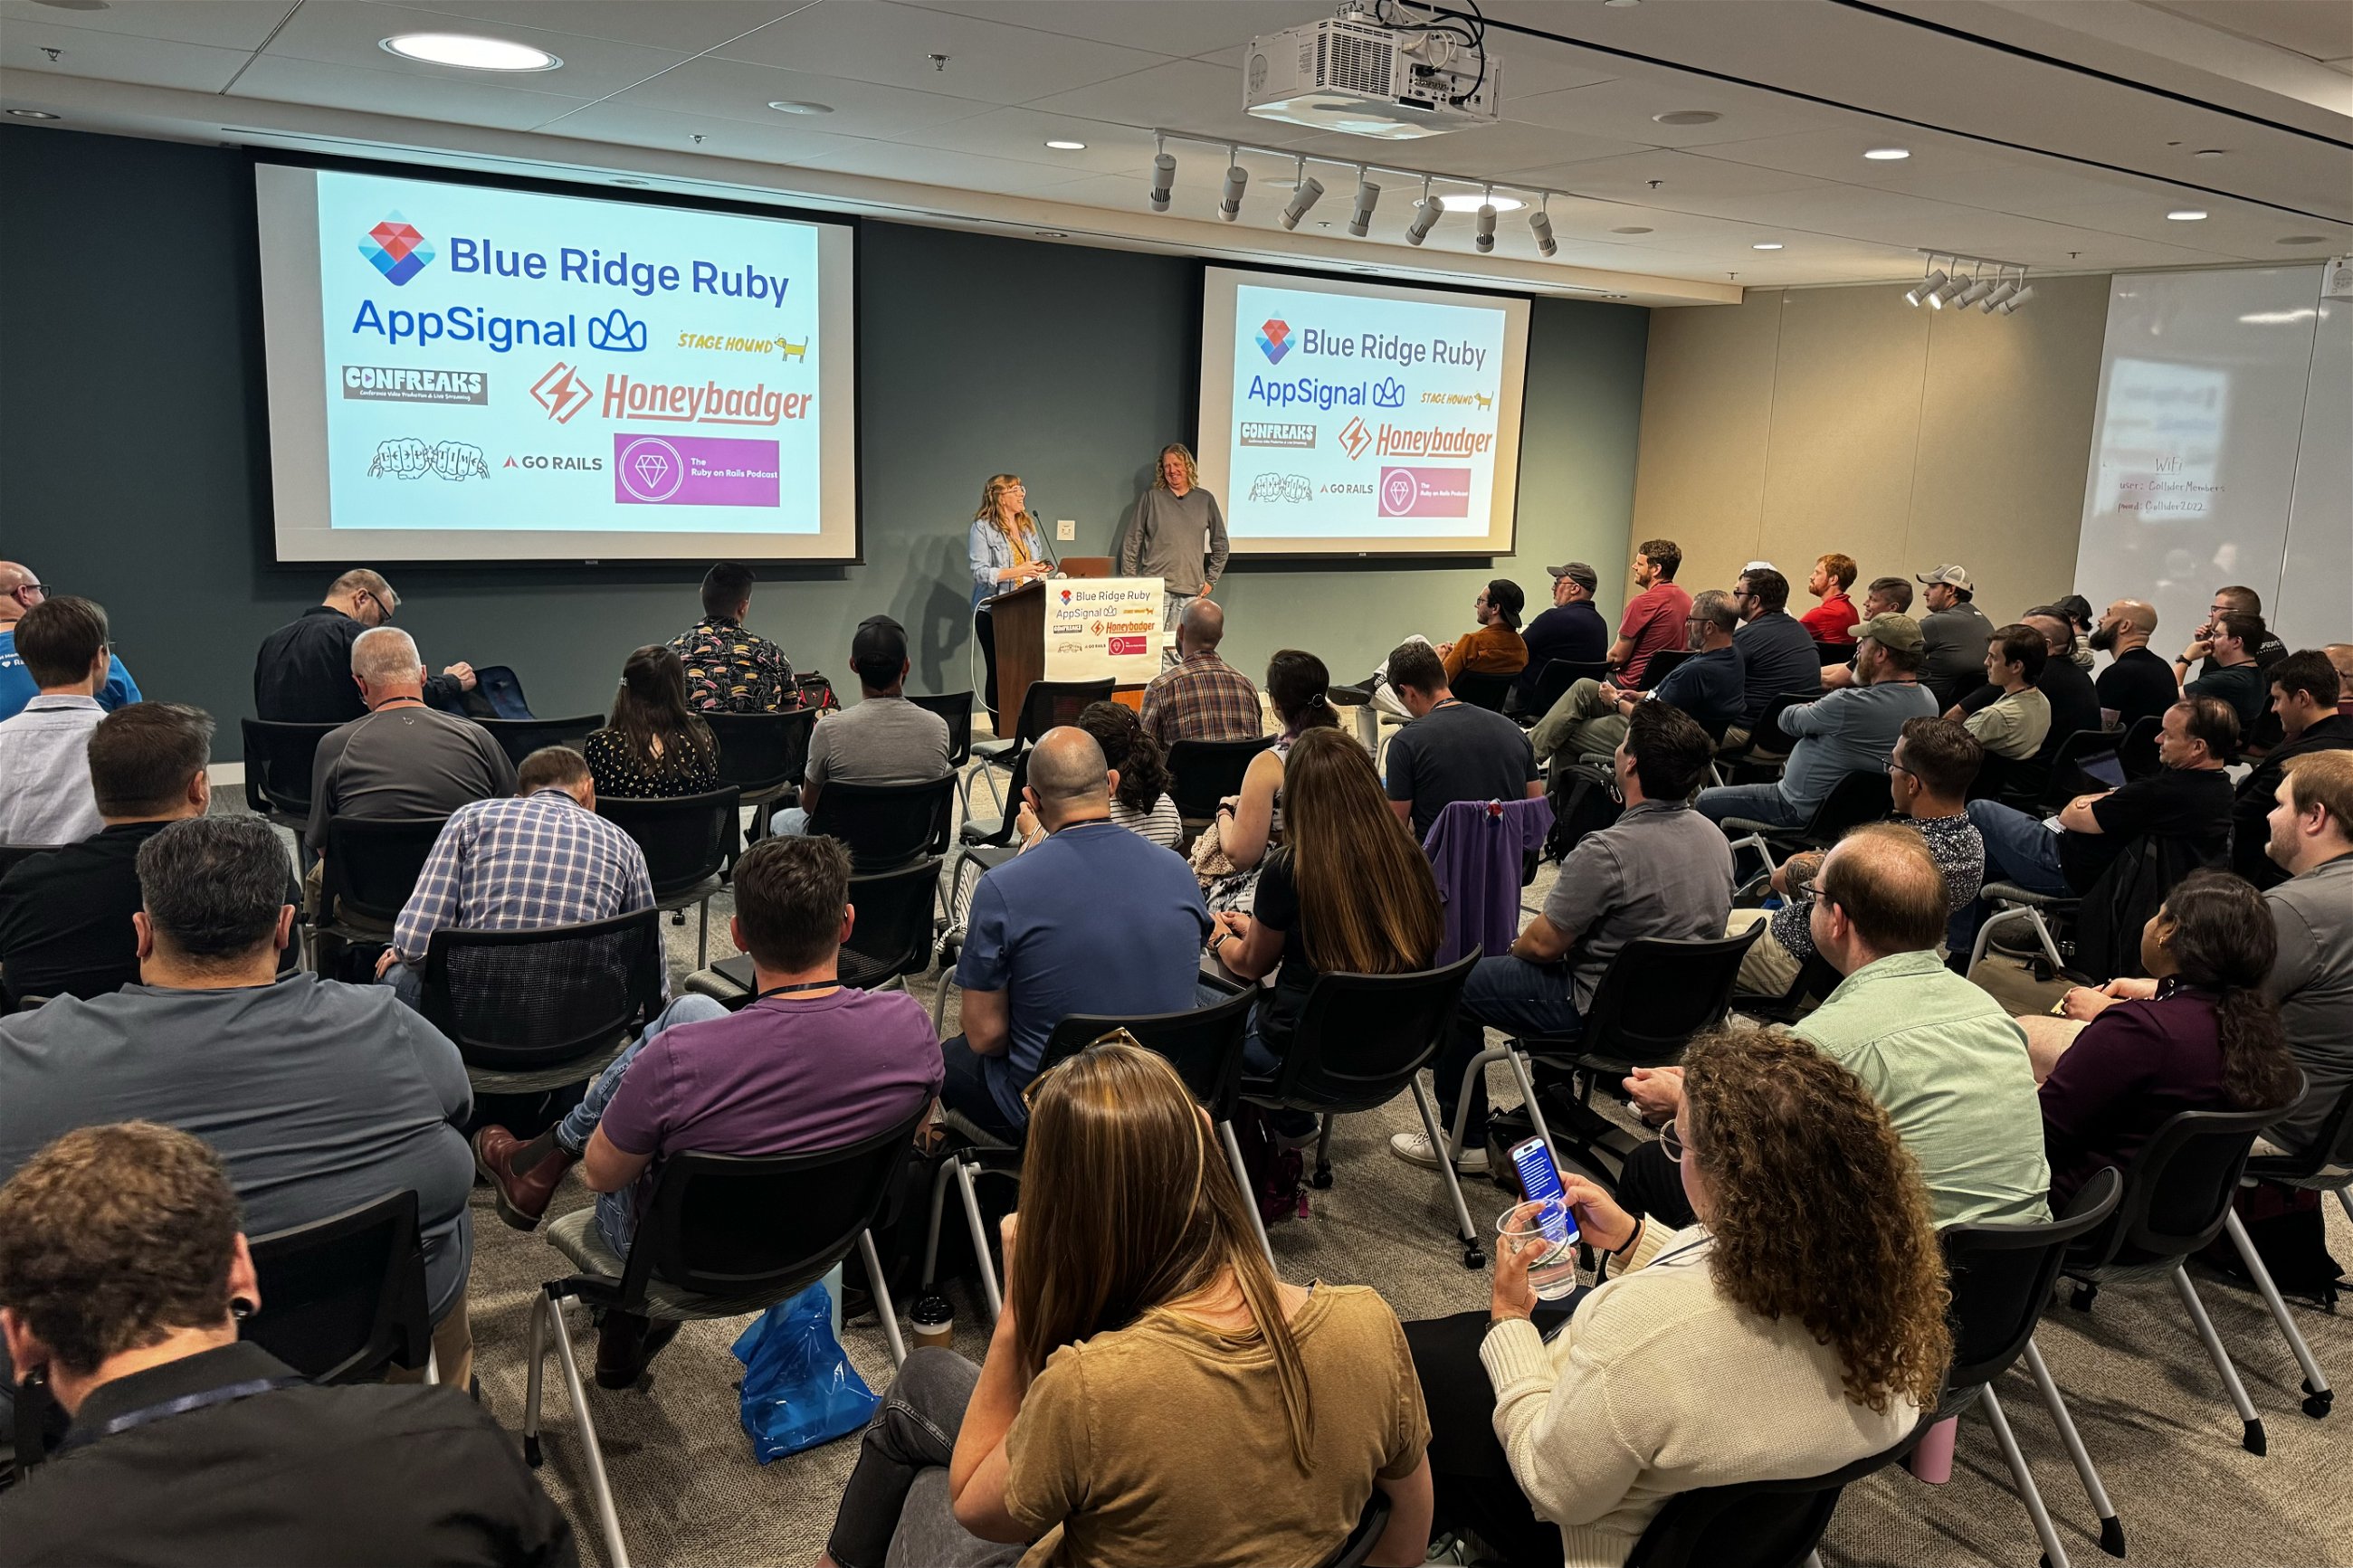 Two speakers addressing a large audience at the Blue Ridge Ruby conference, with sponsor banners including Honeybadger visible behind them, in a room filled with seated attendees listening attentively.